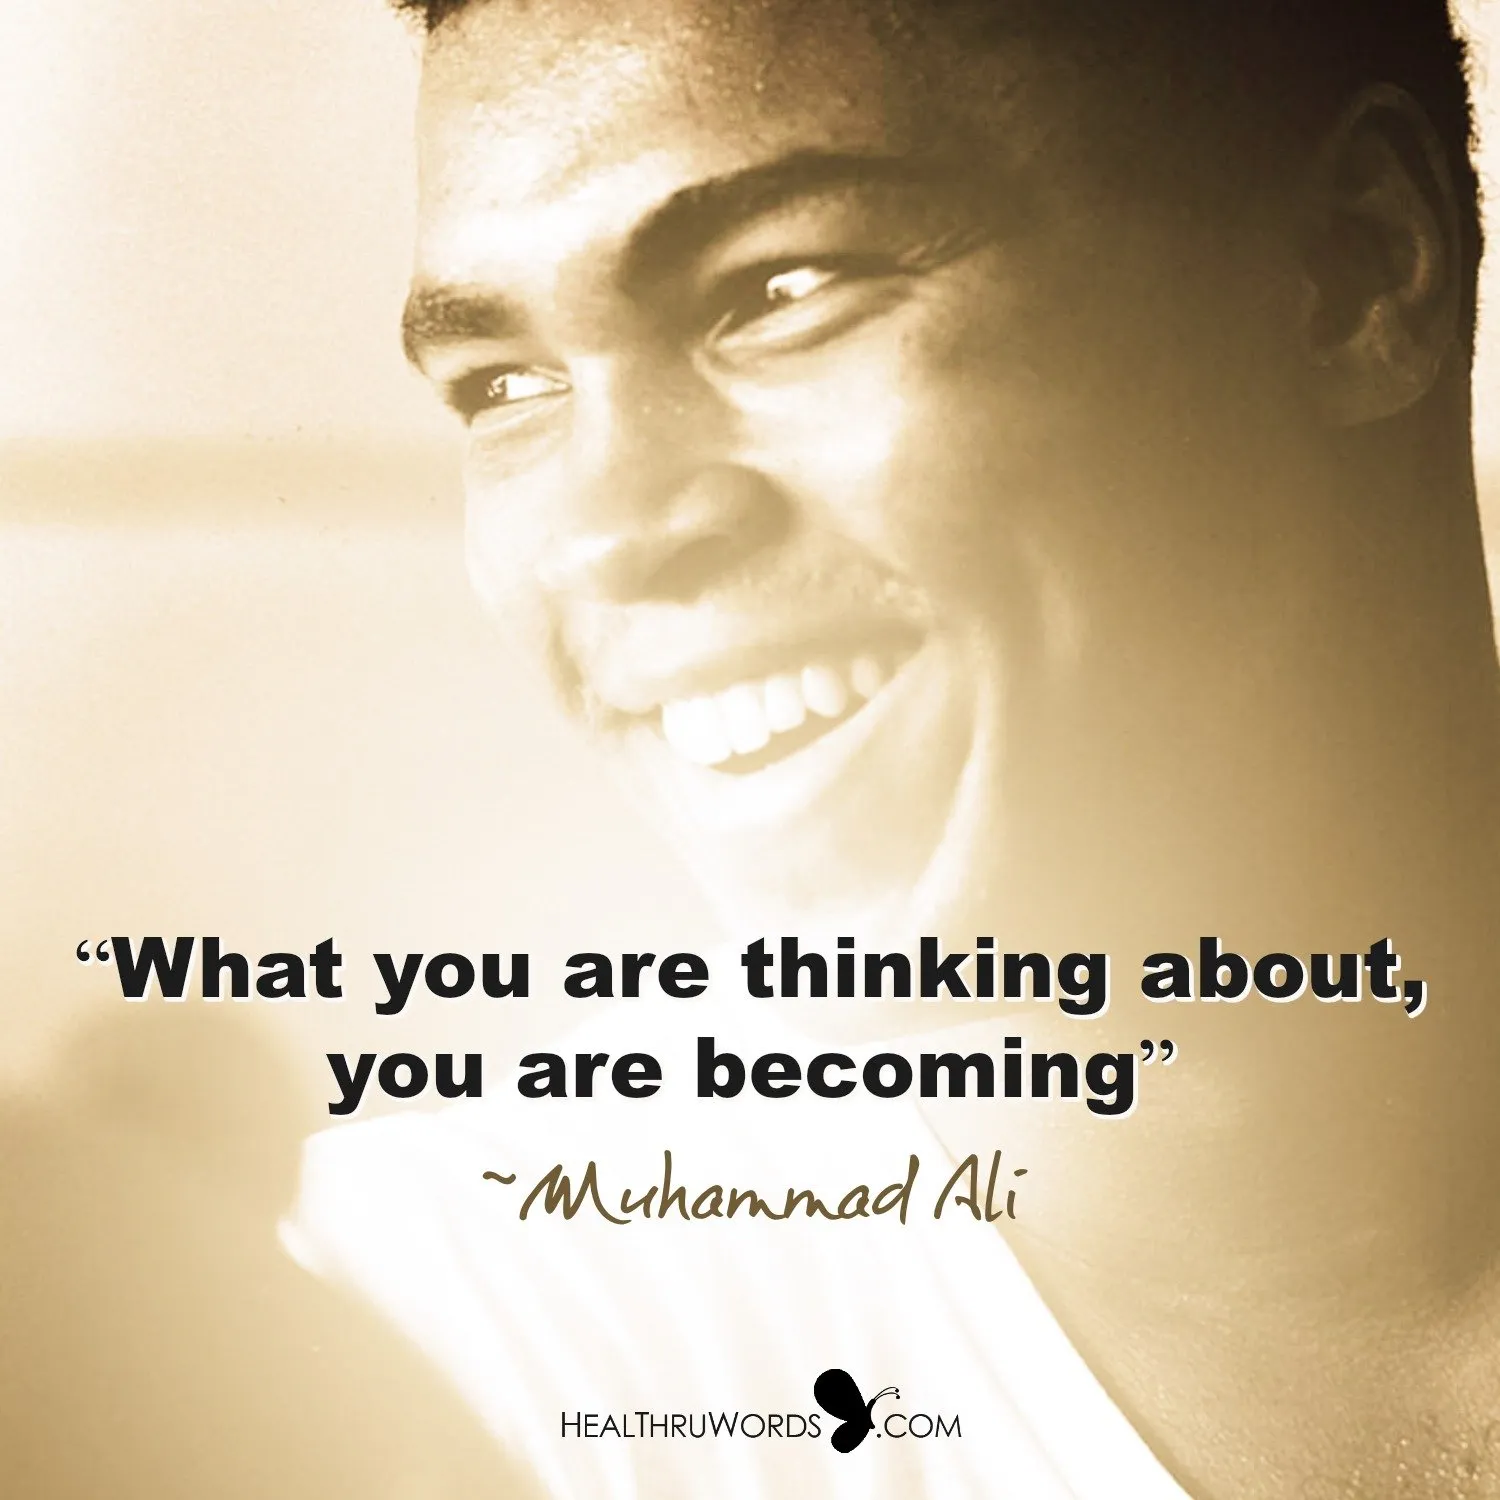 What you are thinking about, you are becoming - Muhammad Ali